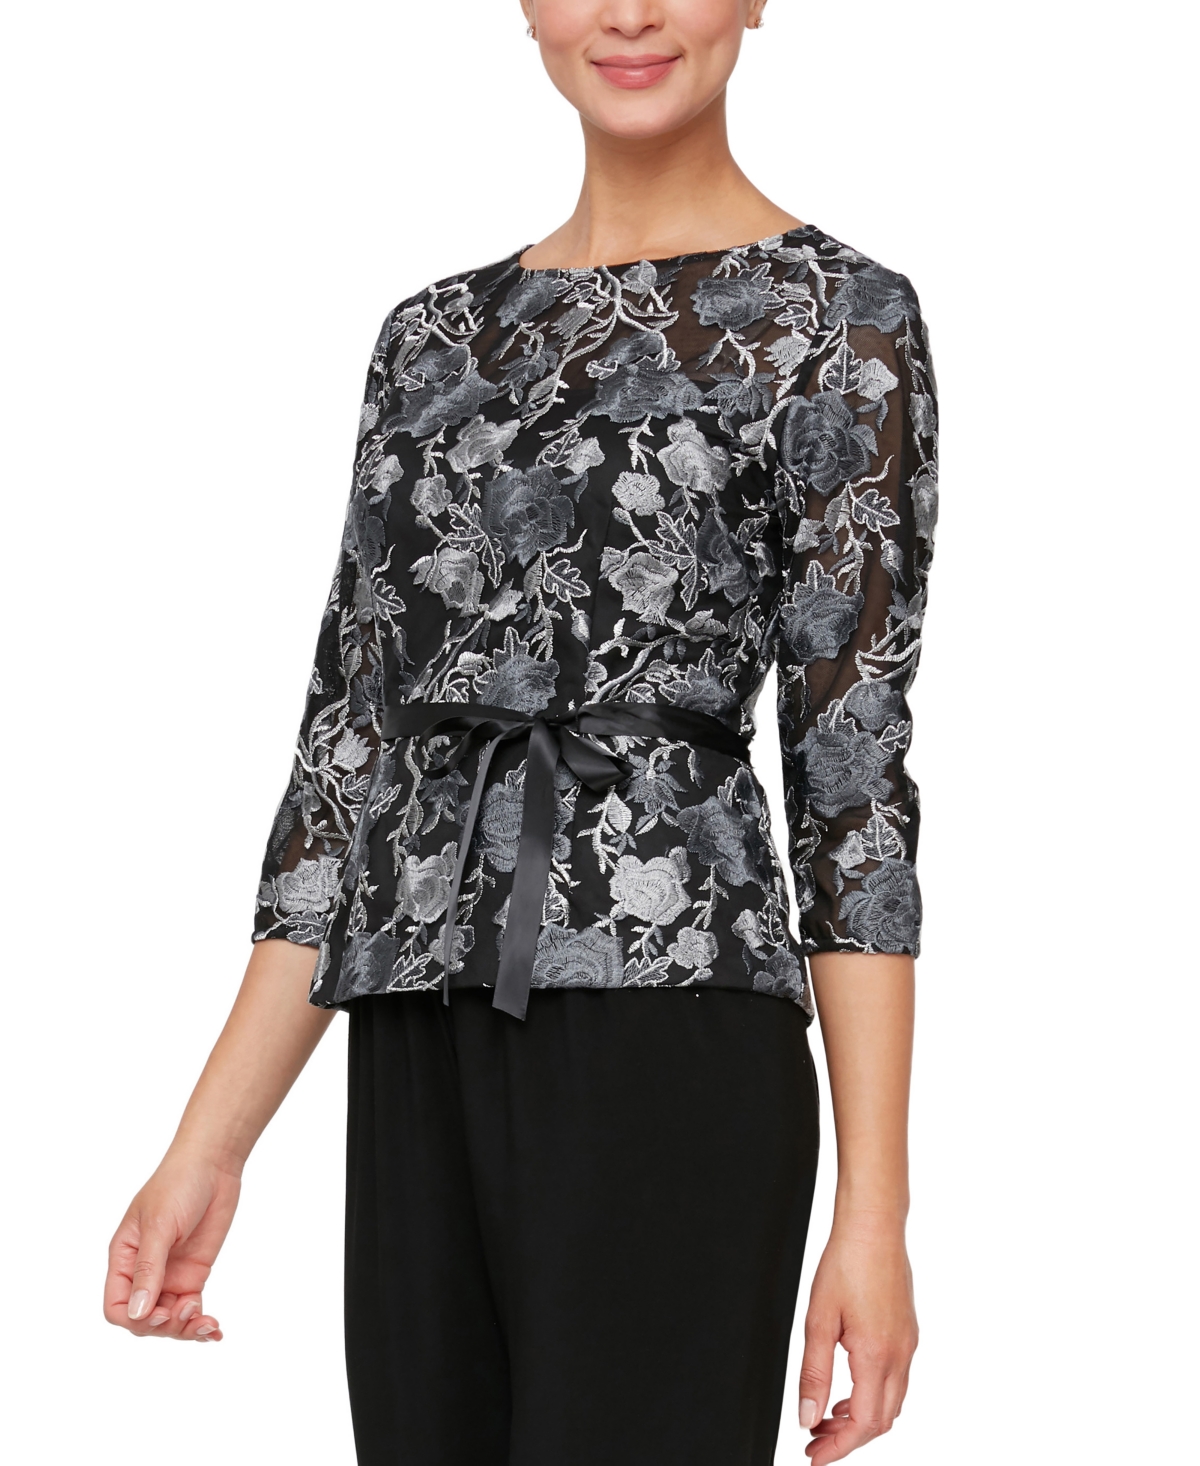  Alex Evenings Women's Printed 3/4 Sleeve Embroidered Tie-Waist Top